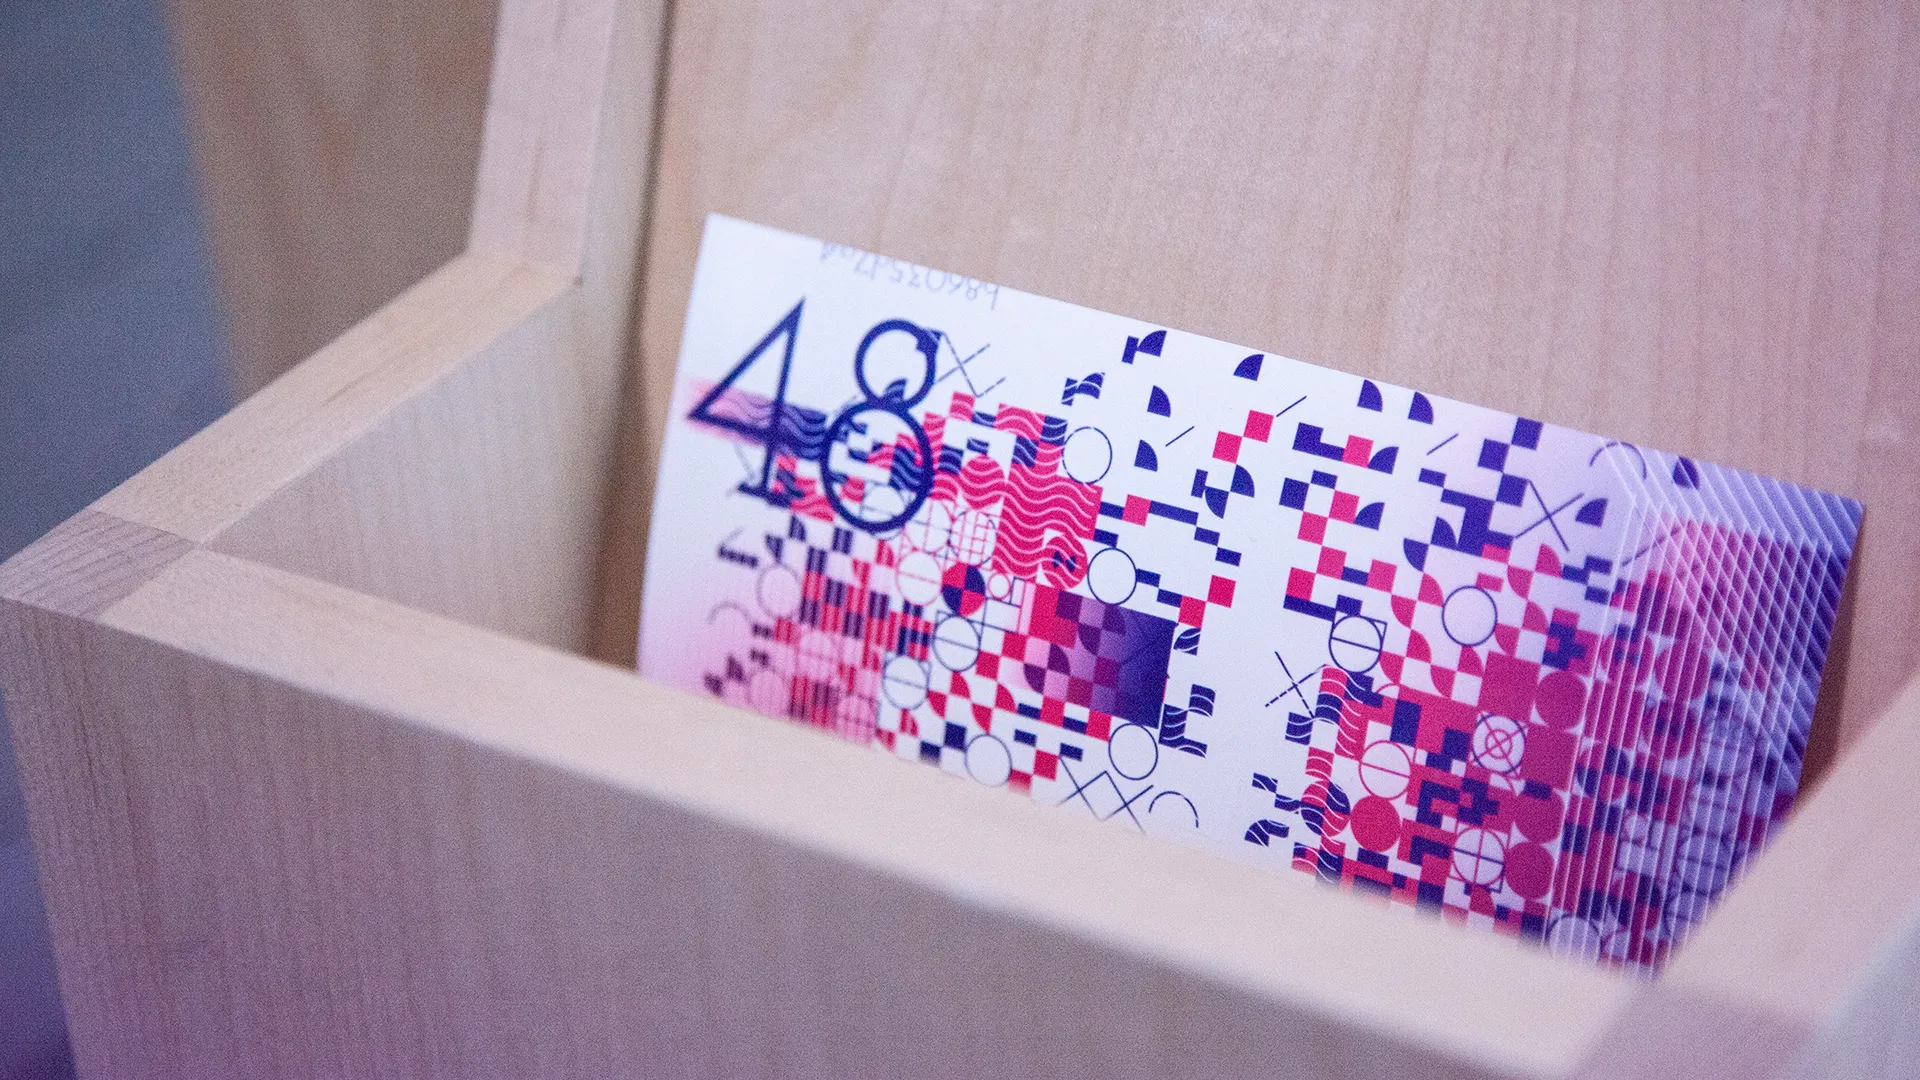 the unqiue blockchain art is printed and spits out on the side of the bench